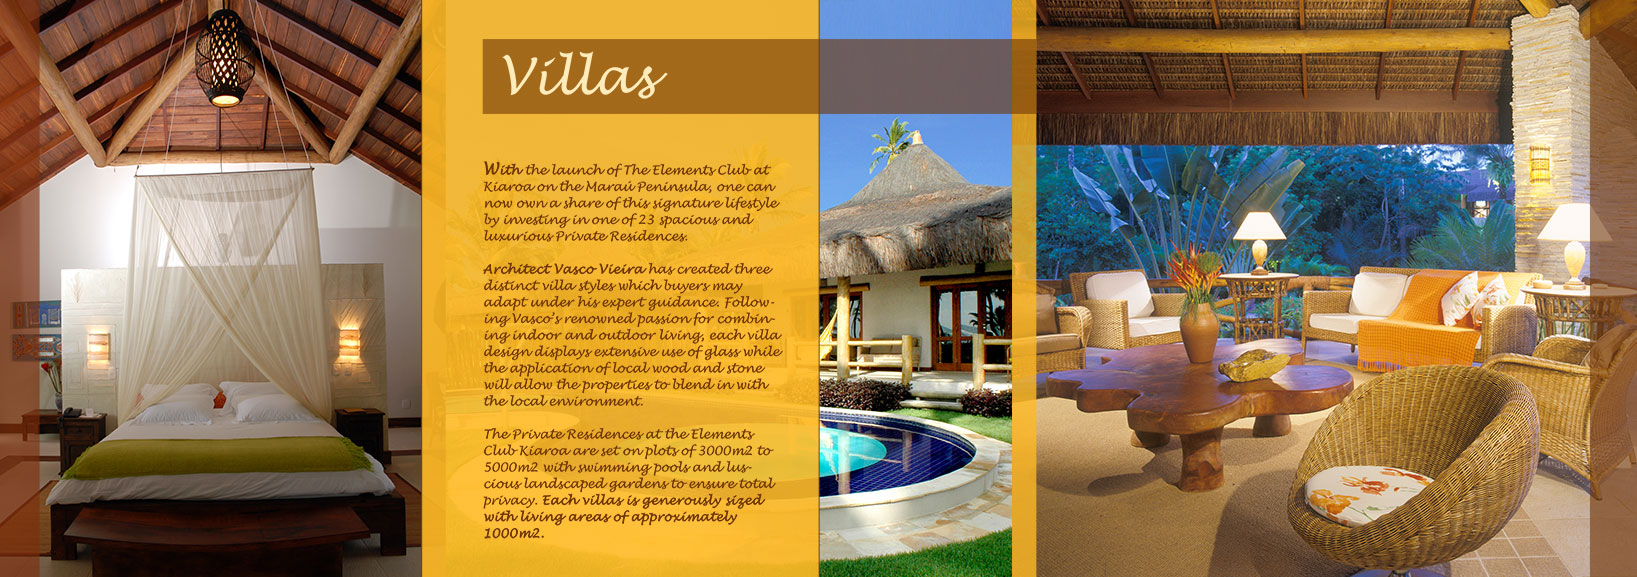 Brochure design submission to a company promoting a luxury holiday location